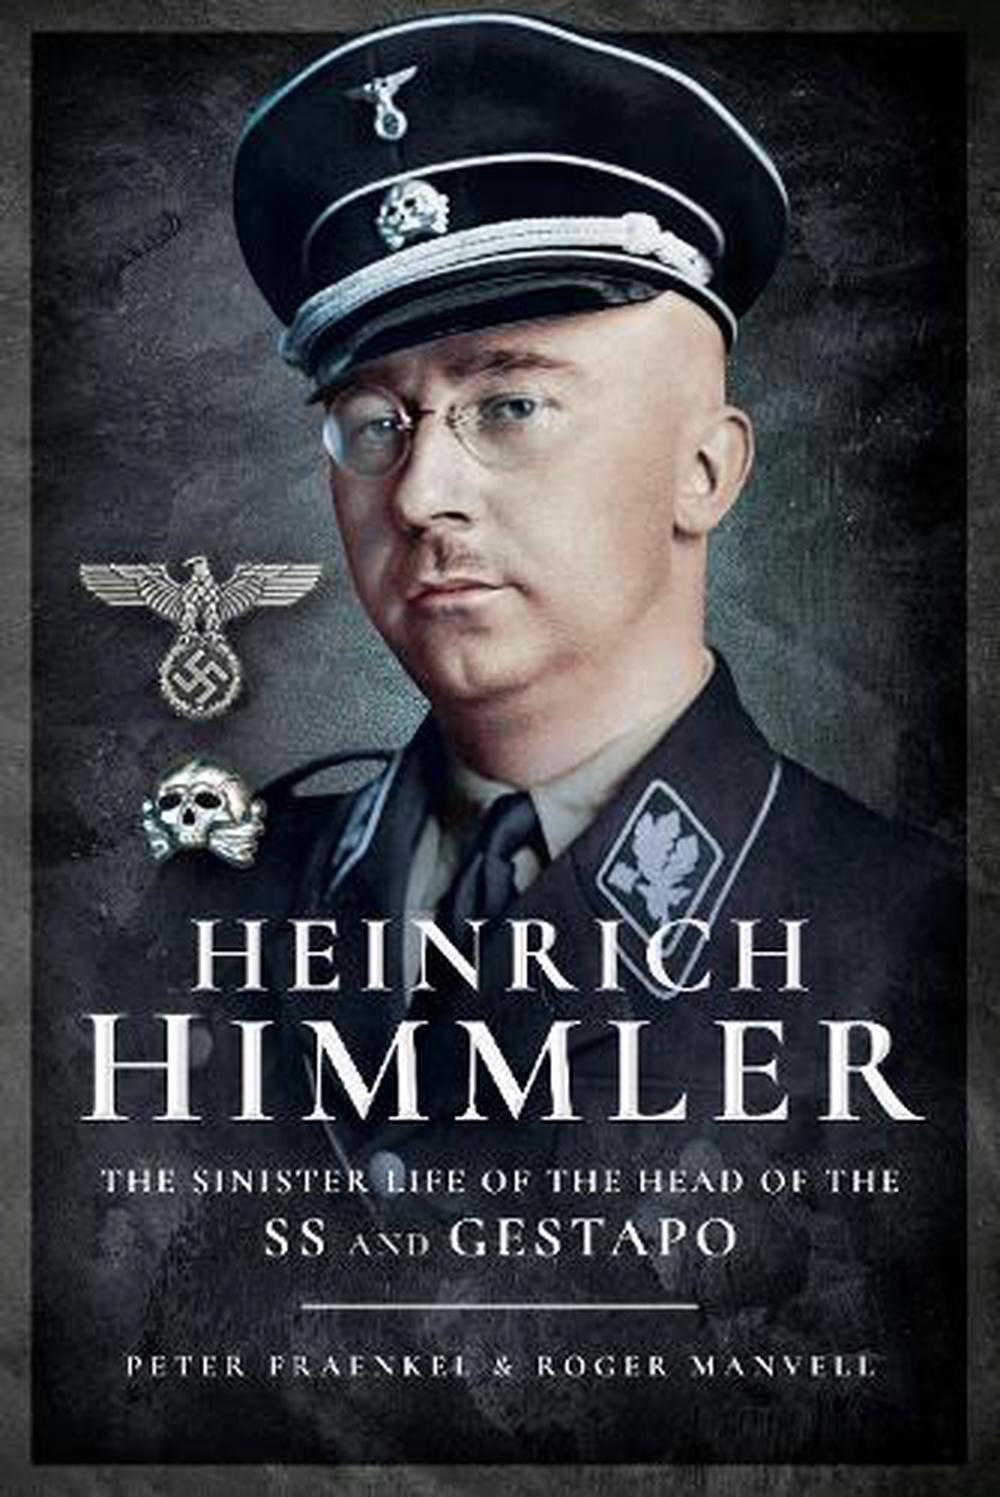 Heinrich Himmler: The Sinister Life of the Head of the SS ...